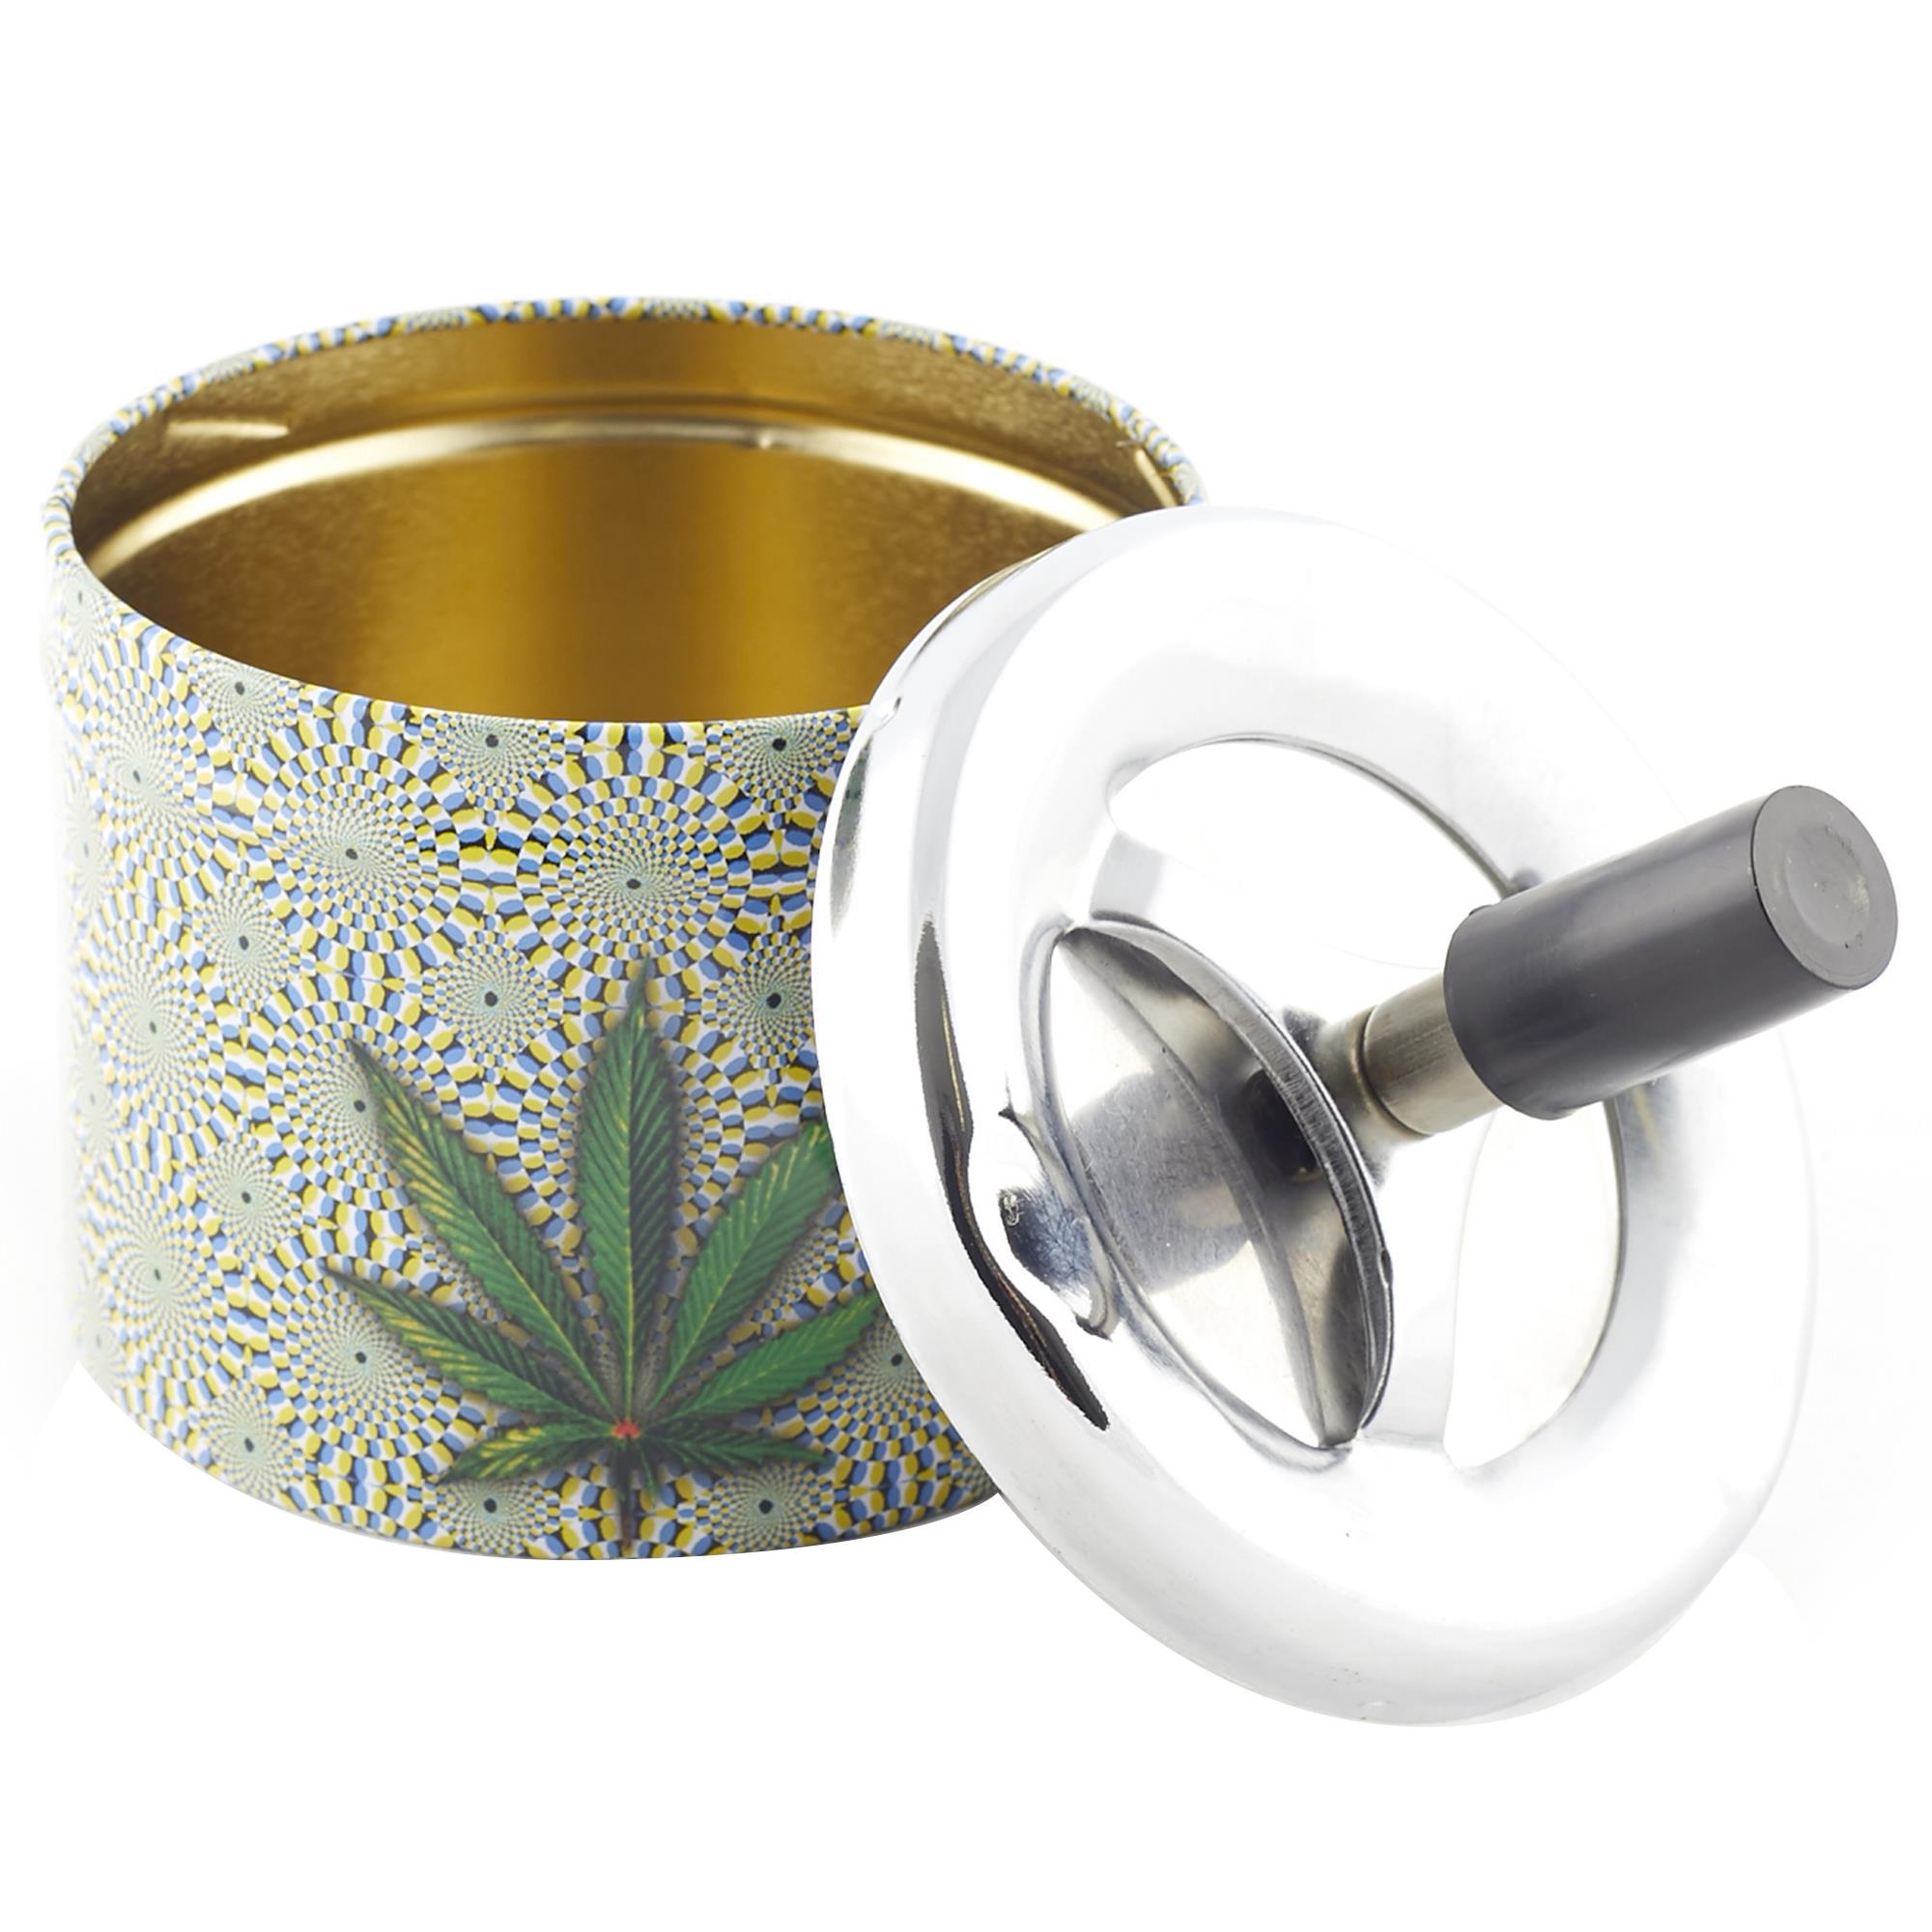 SPINNING PSYCHEDELIC LEAF METAL ASHTRAY